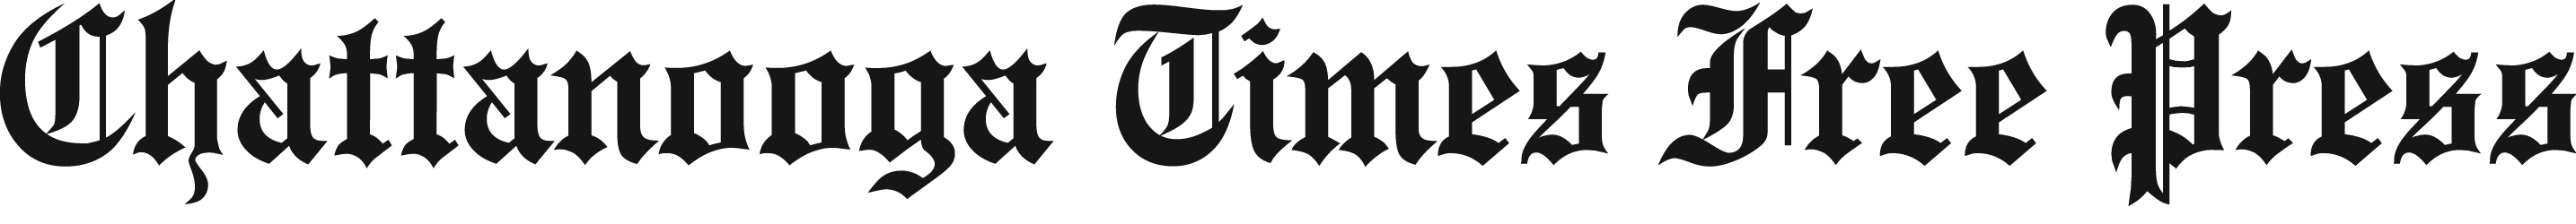 Chattanooga Times Free Press logo Womply